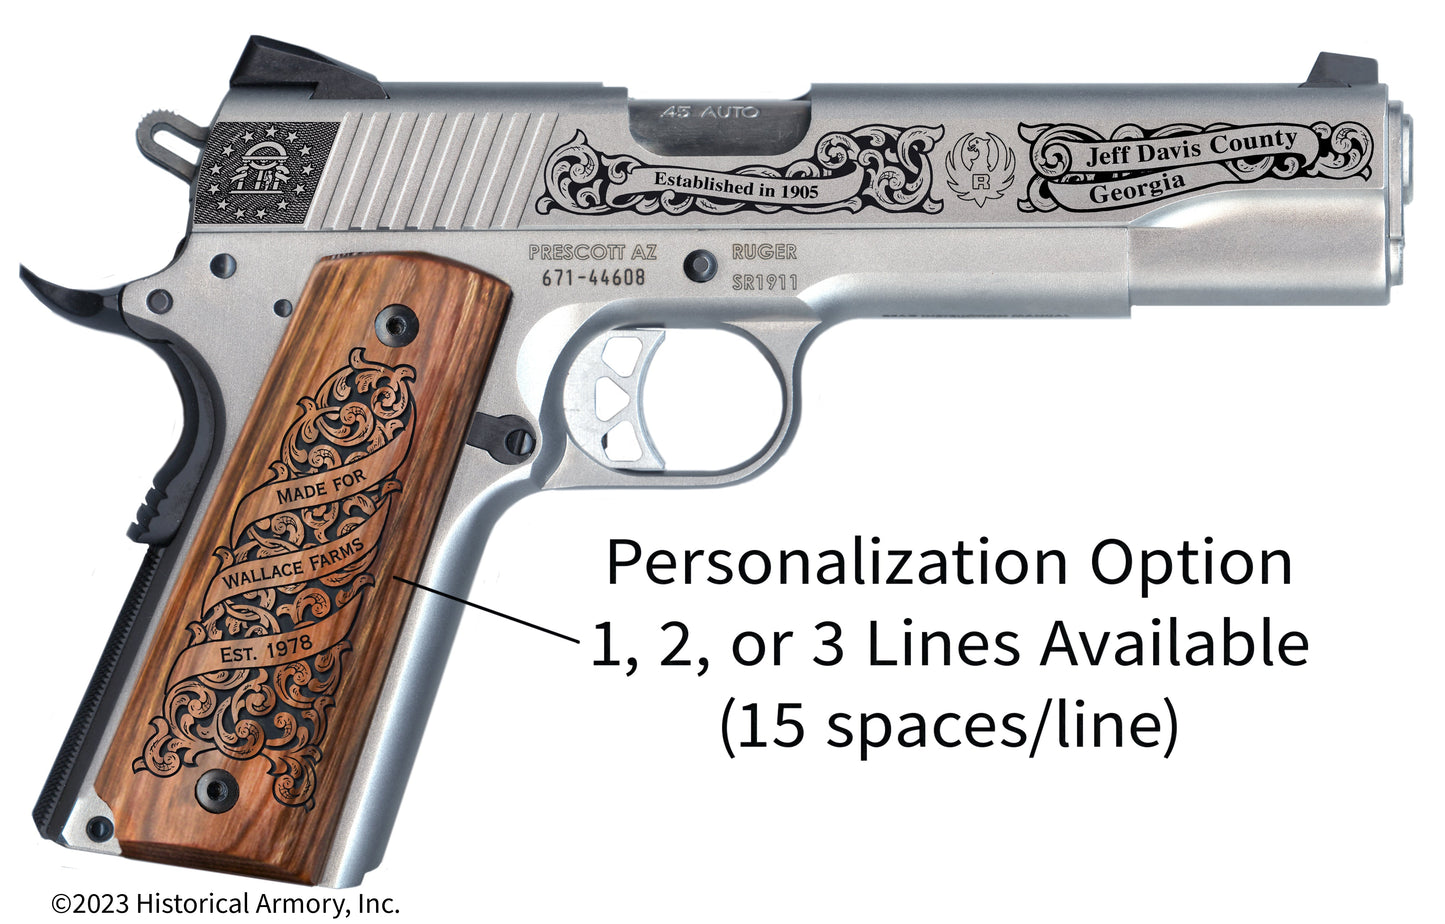 Jeff Davis County Georgia Personalized Engraved .45 Auto Ruger 1911